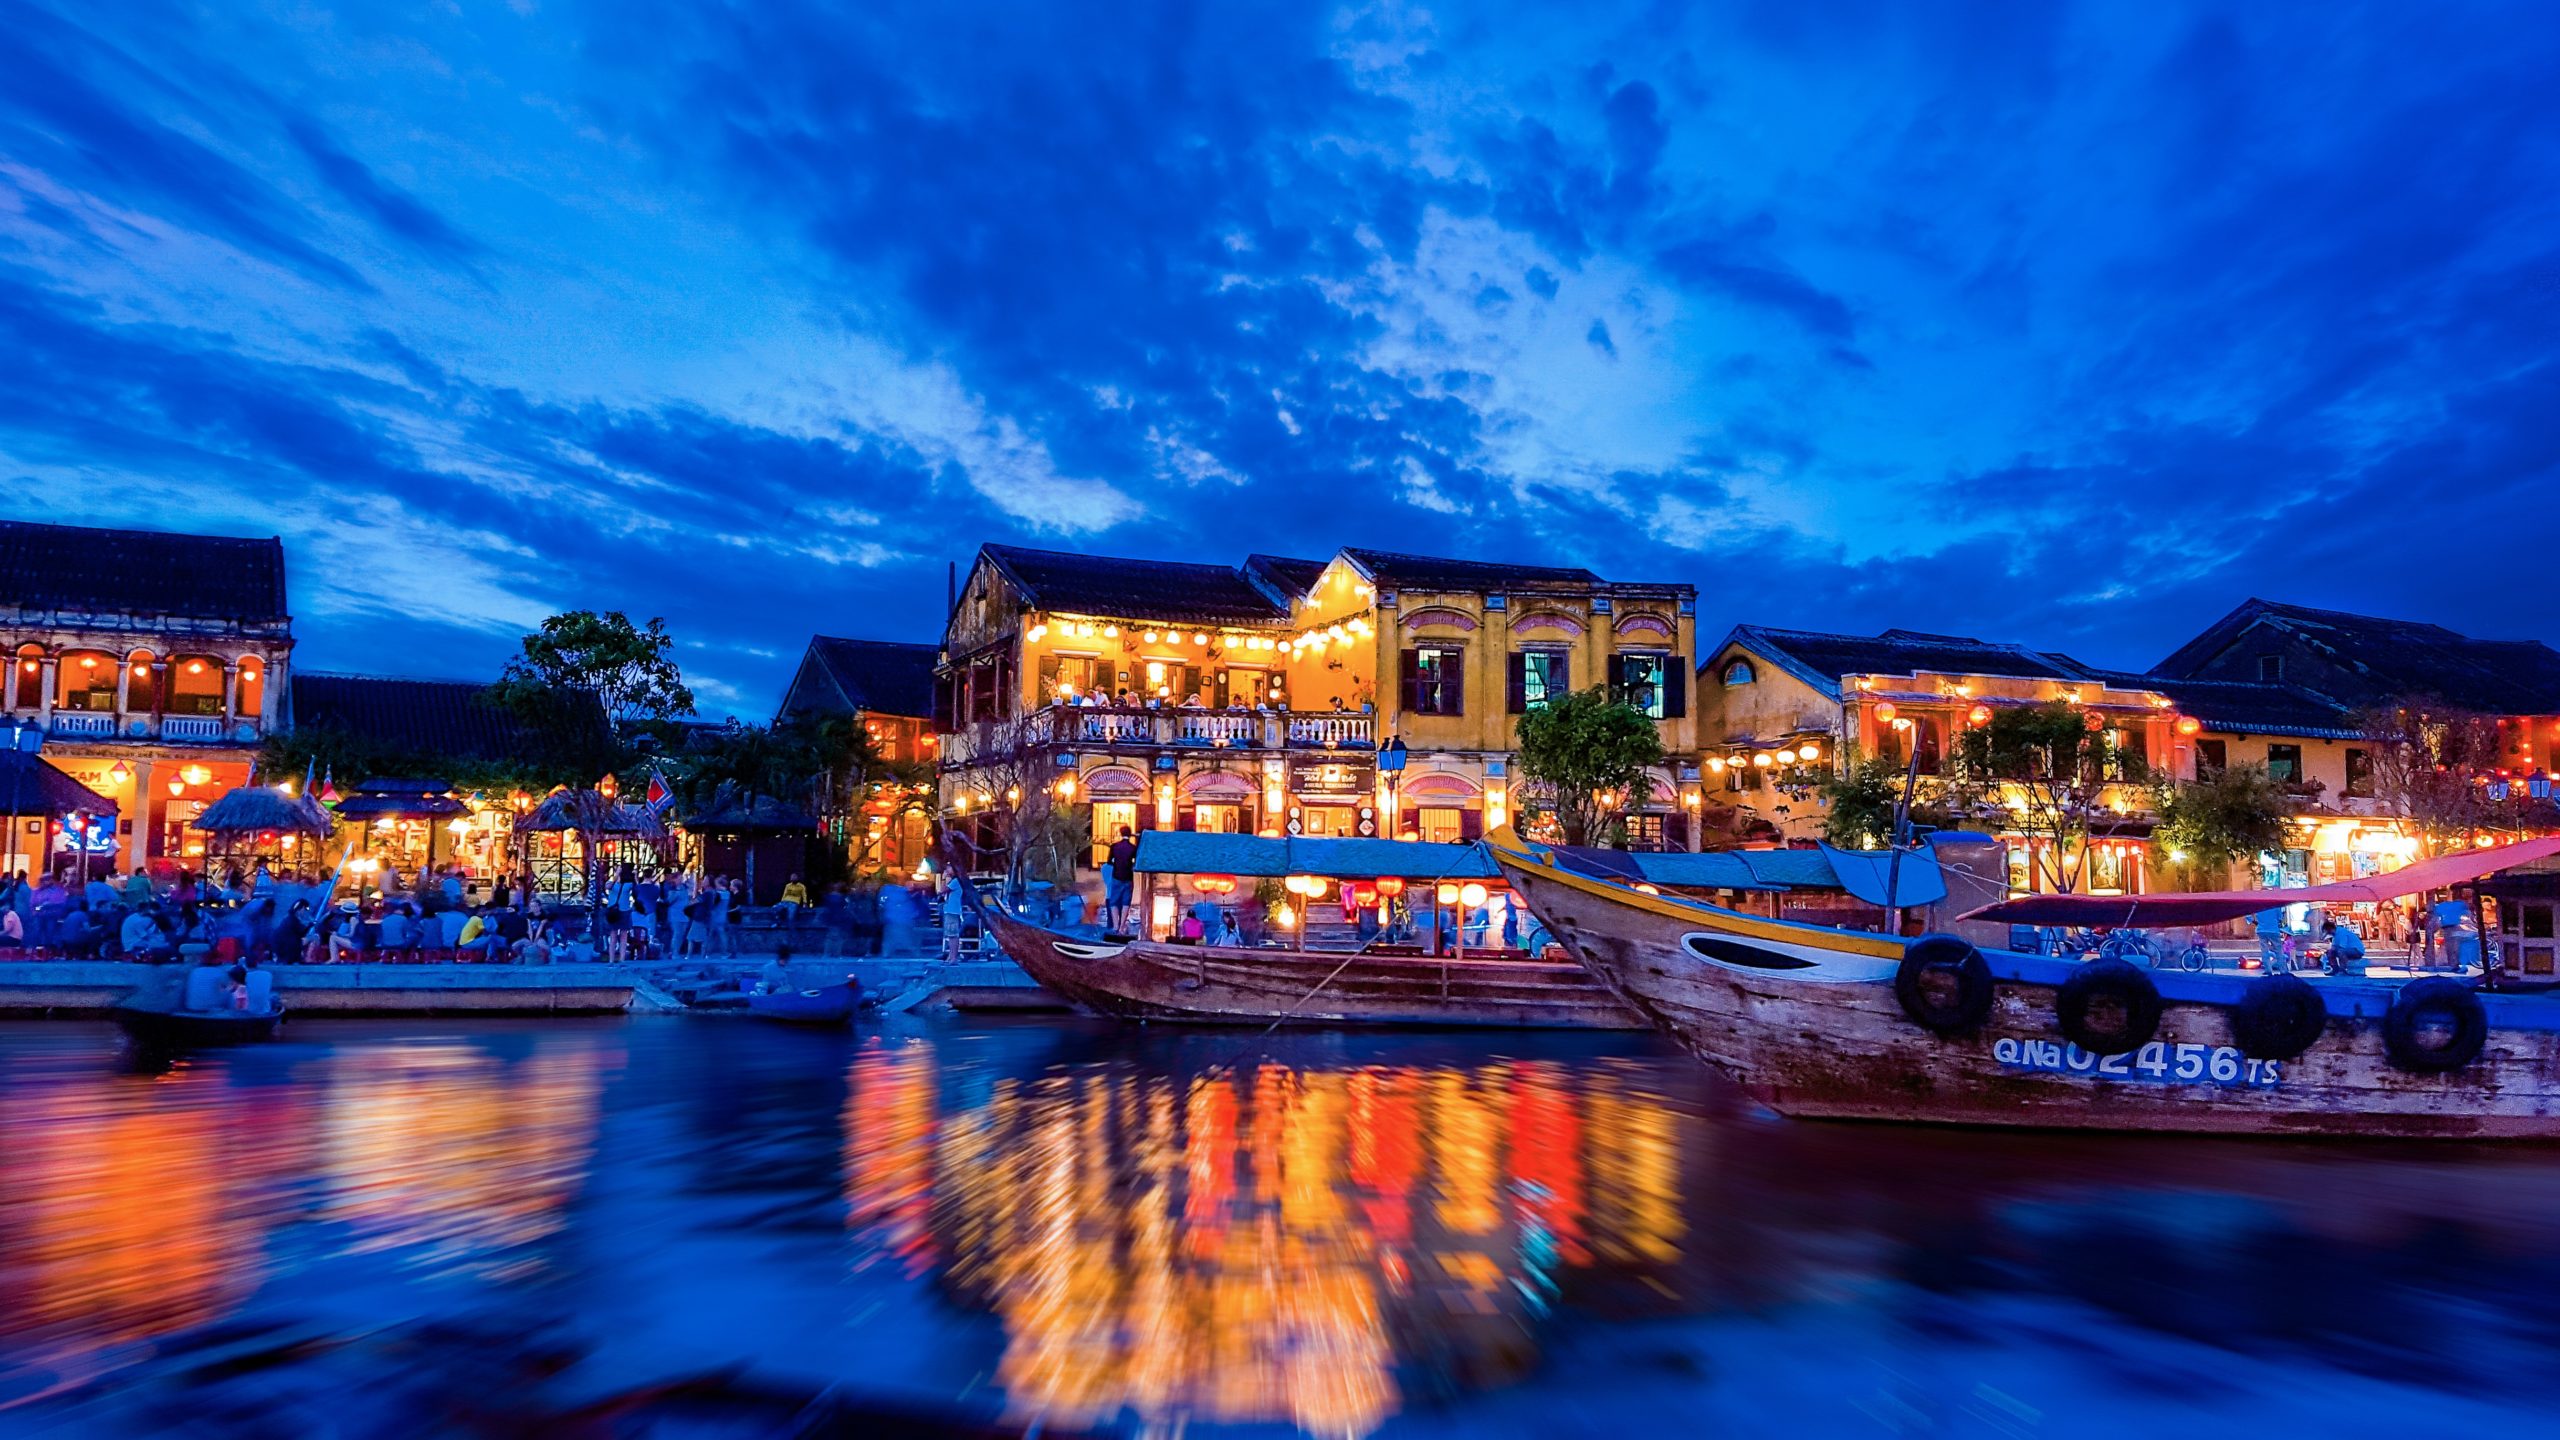 Hoi An Old Ancient Town near river in the night time